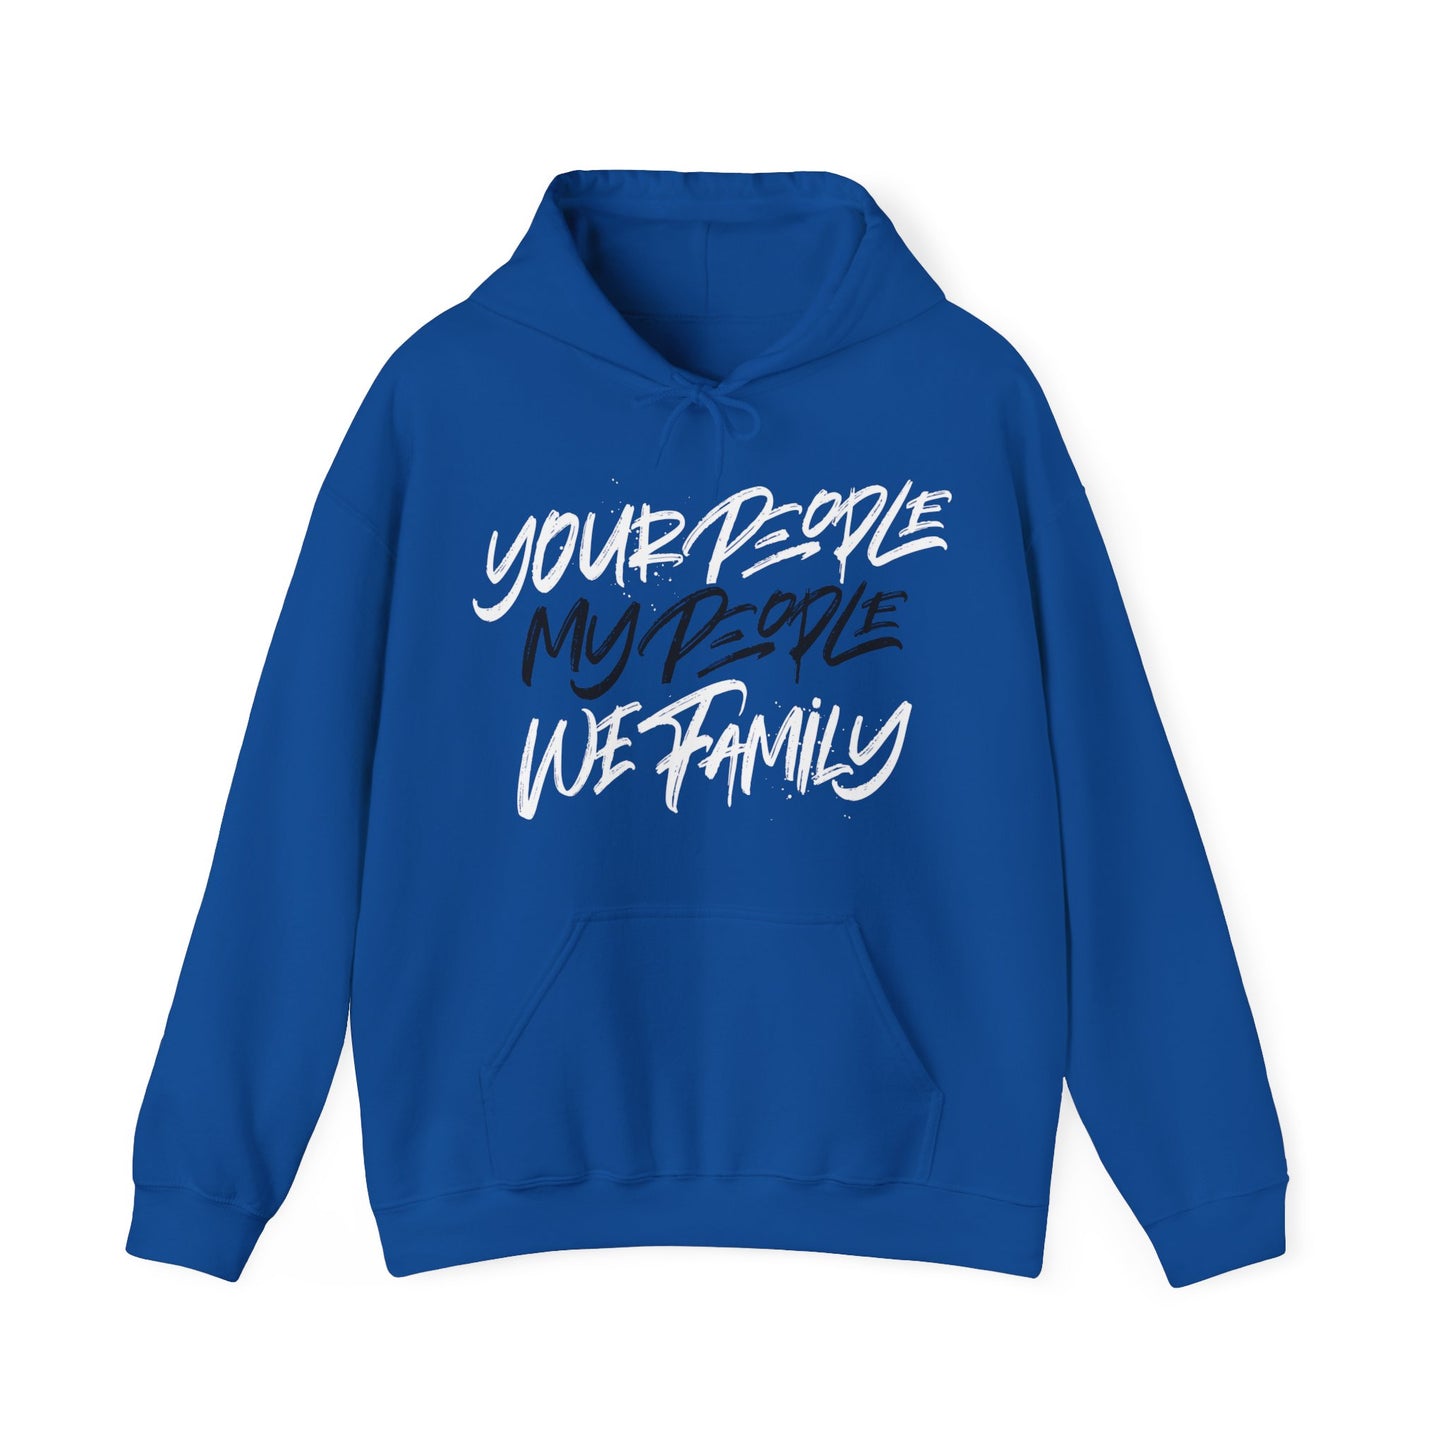 Your People My People Hoodie w/black/white letters